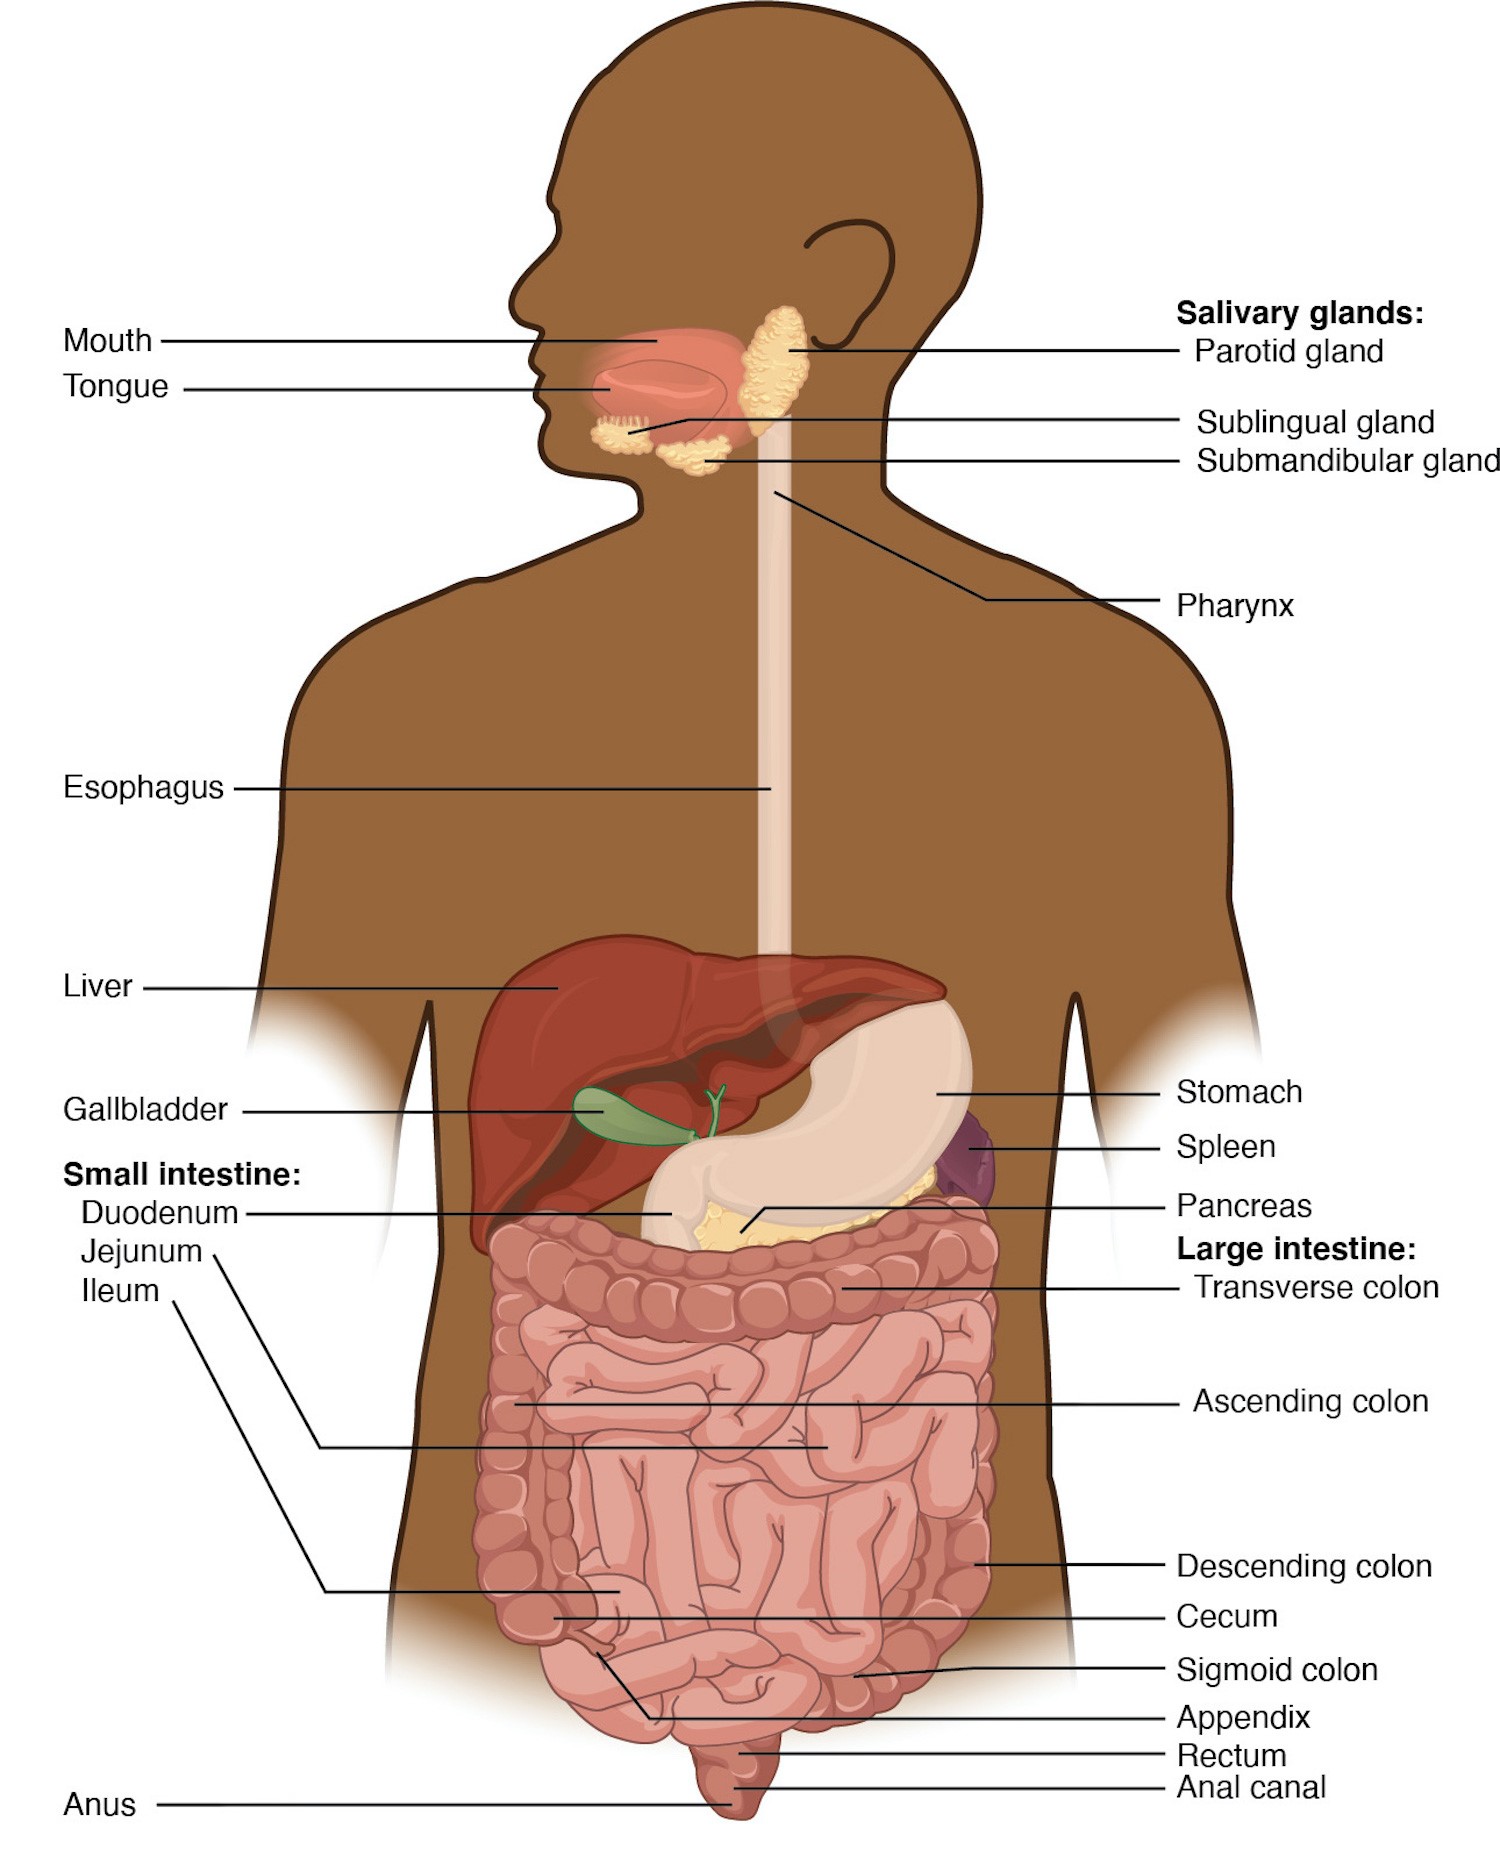 Illustration showing the human gastrointestinal system with text labels for major parts